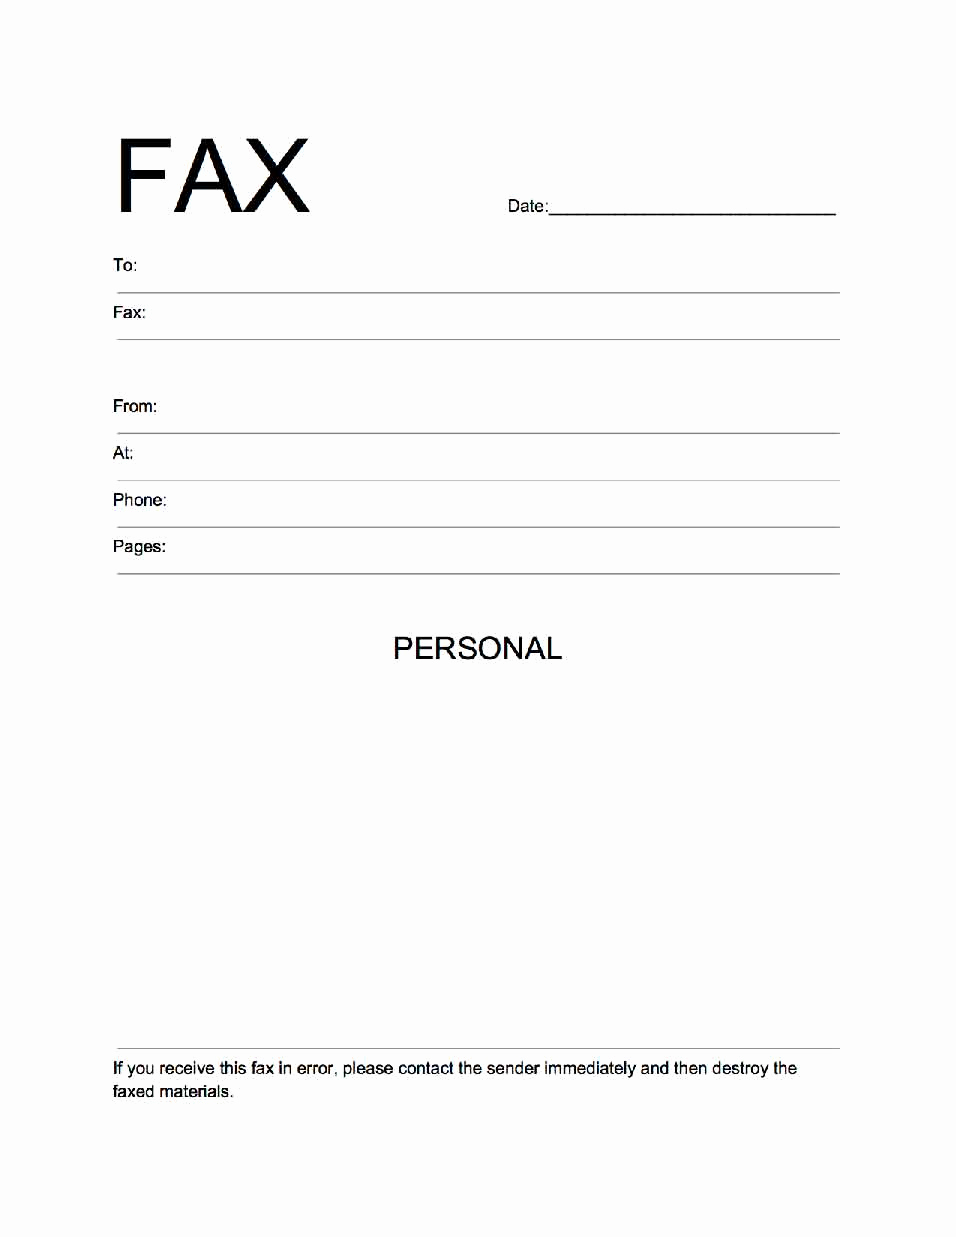 Fax Cover Sheet Template Free Luxury Printable Standard Fax Cover Sheet Printable Pages